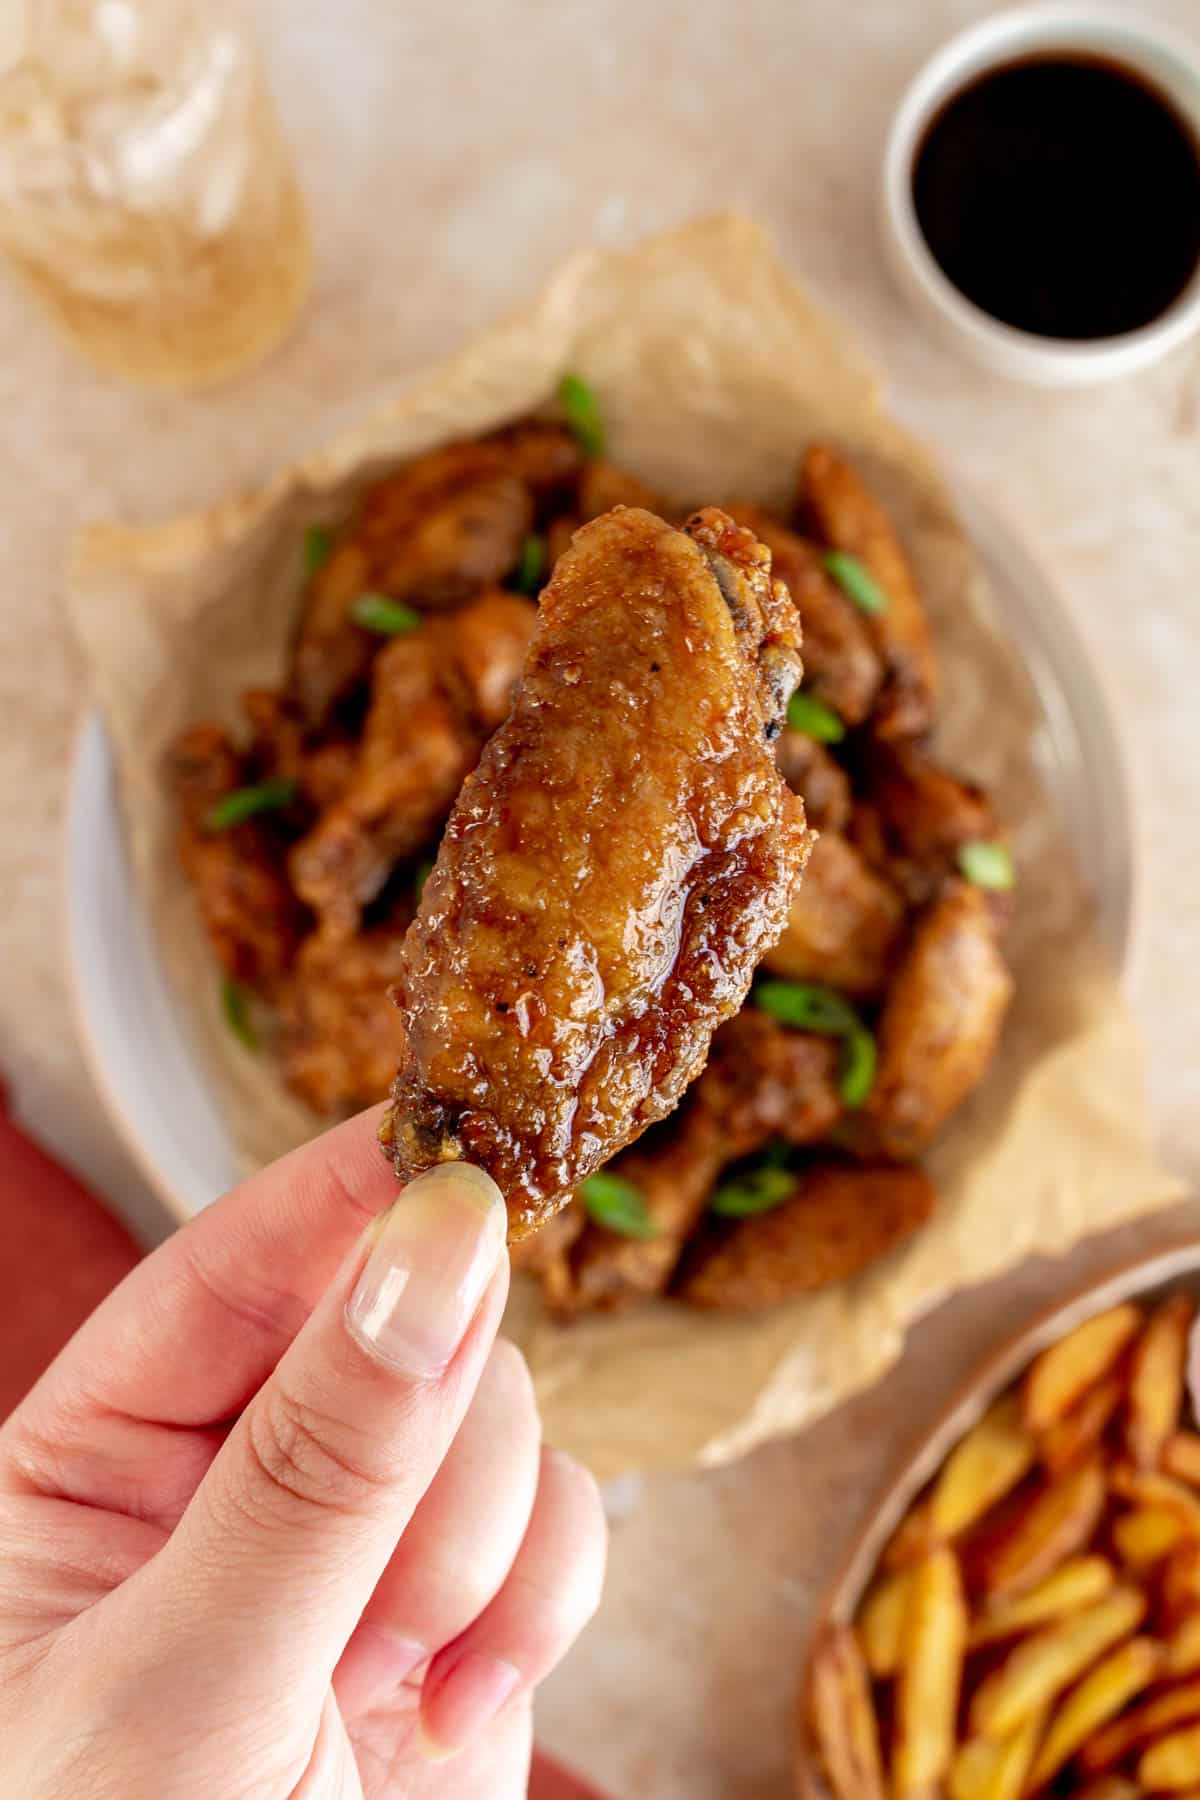 A hand holding up a honey soy chicken wing over a plate of more wings.